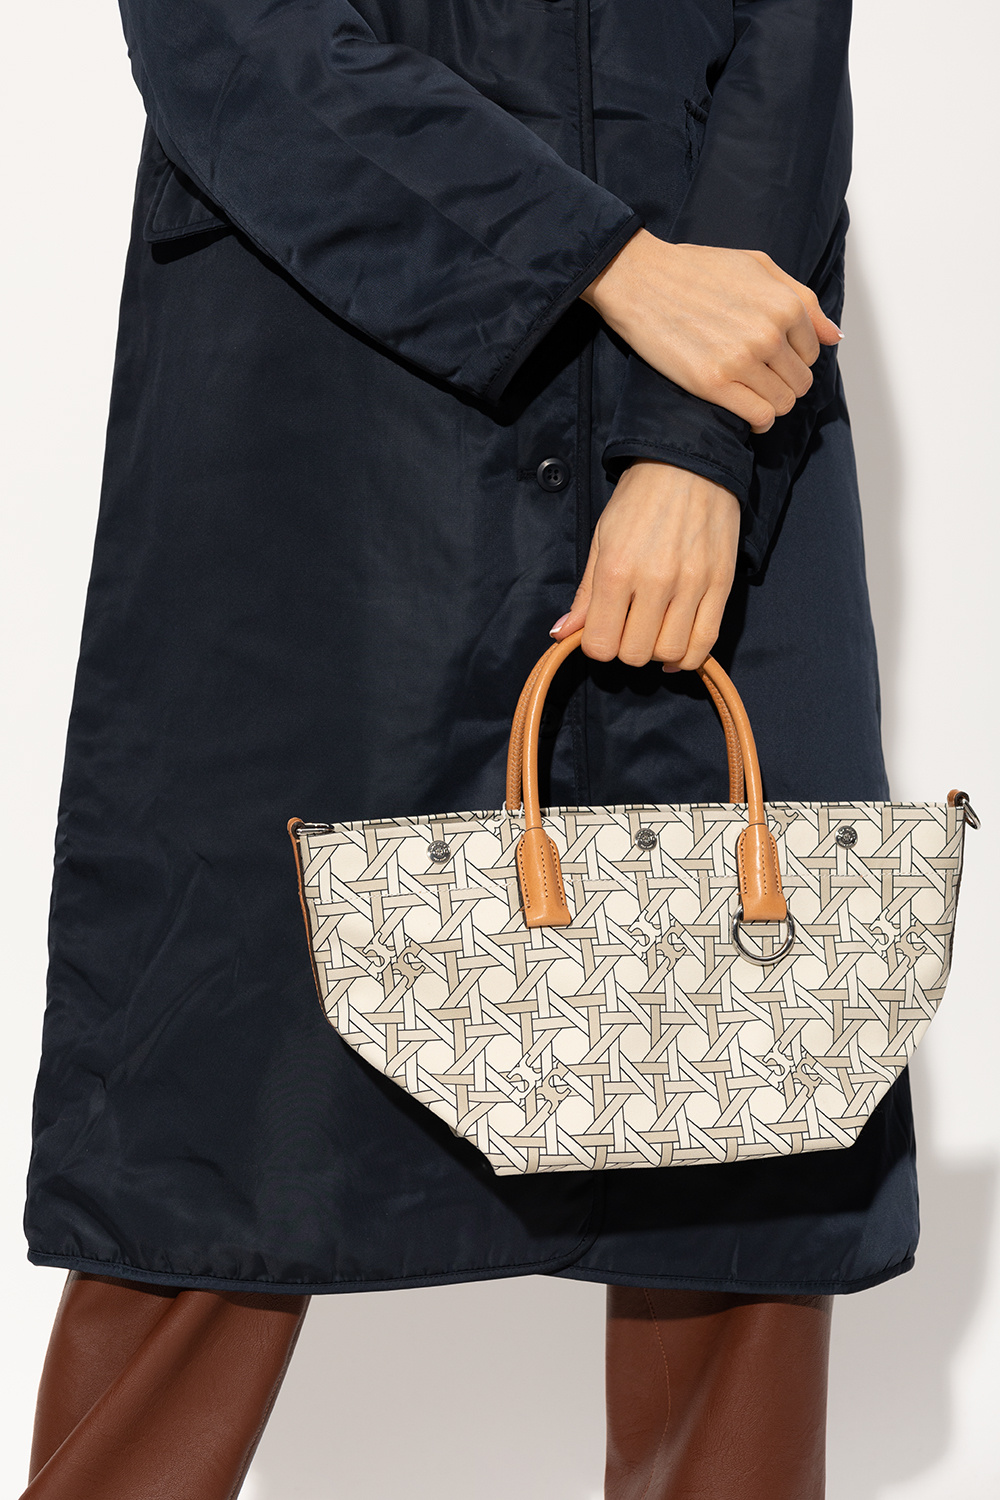 Basketweave Small' shopper bag Tory Burch - IetpShops GB - Carry your  everyday essentials in bold style thanks to this statement leopard print tote  bag from